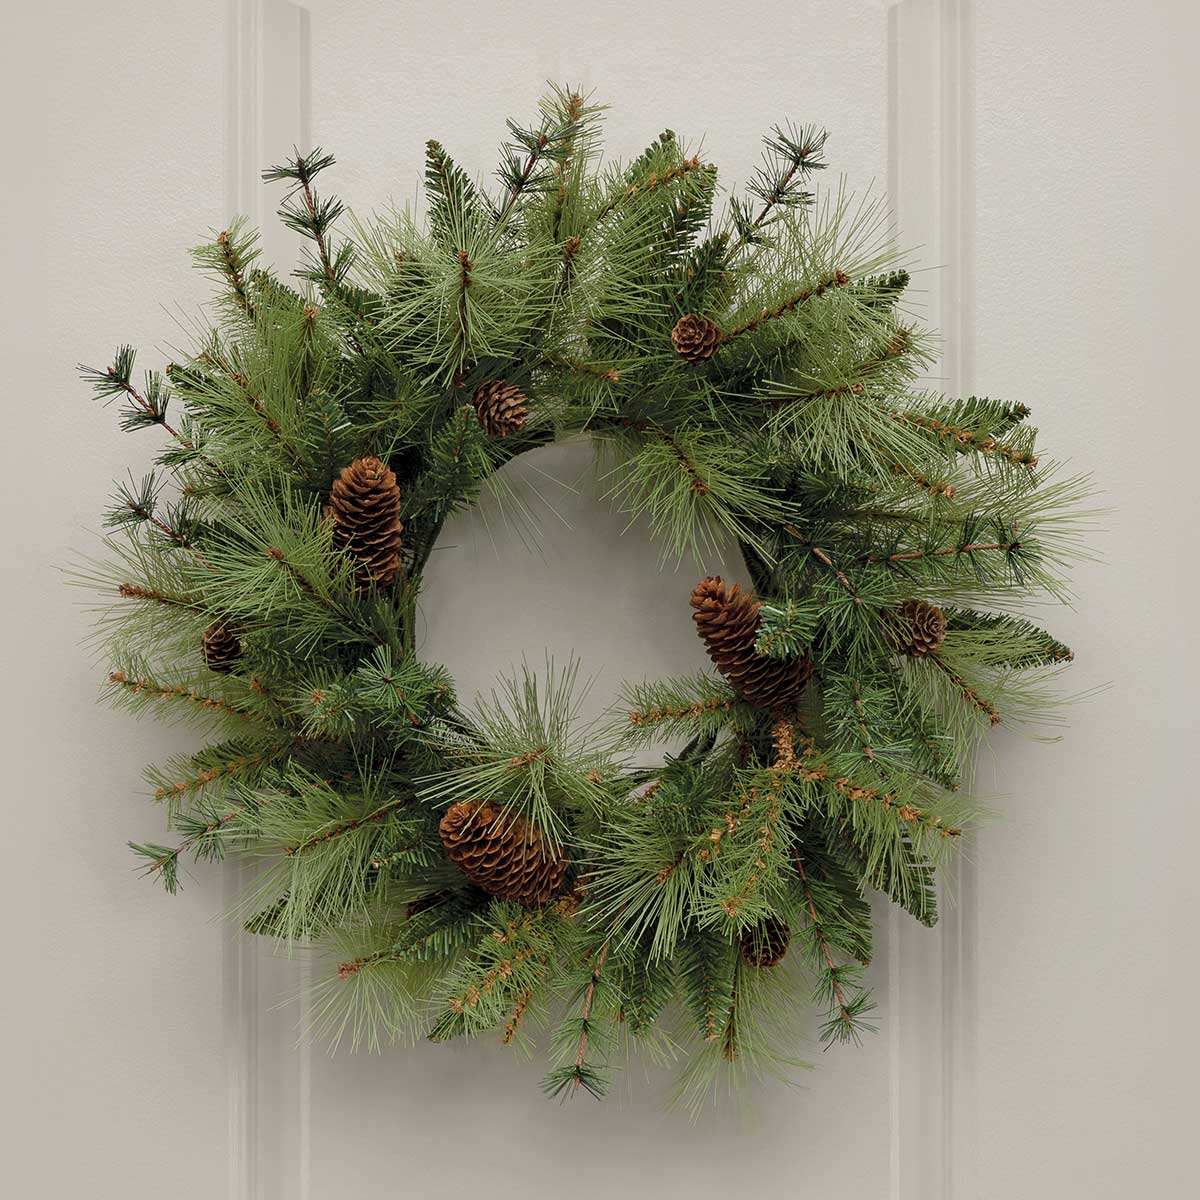 WREATH YELLOWSTONE PINE 18IN (INNER RING 7IN)